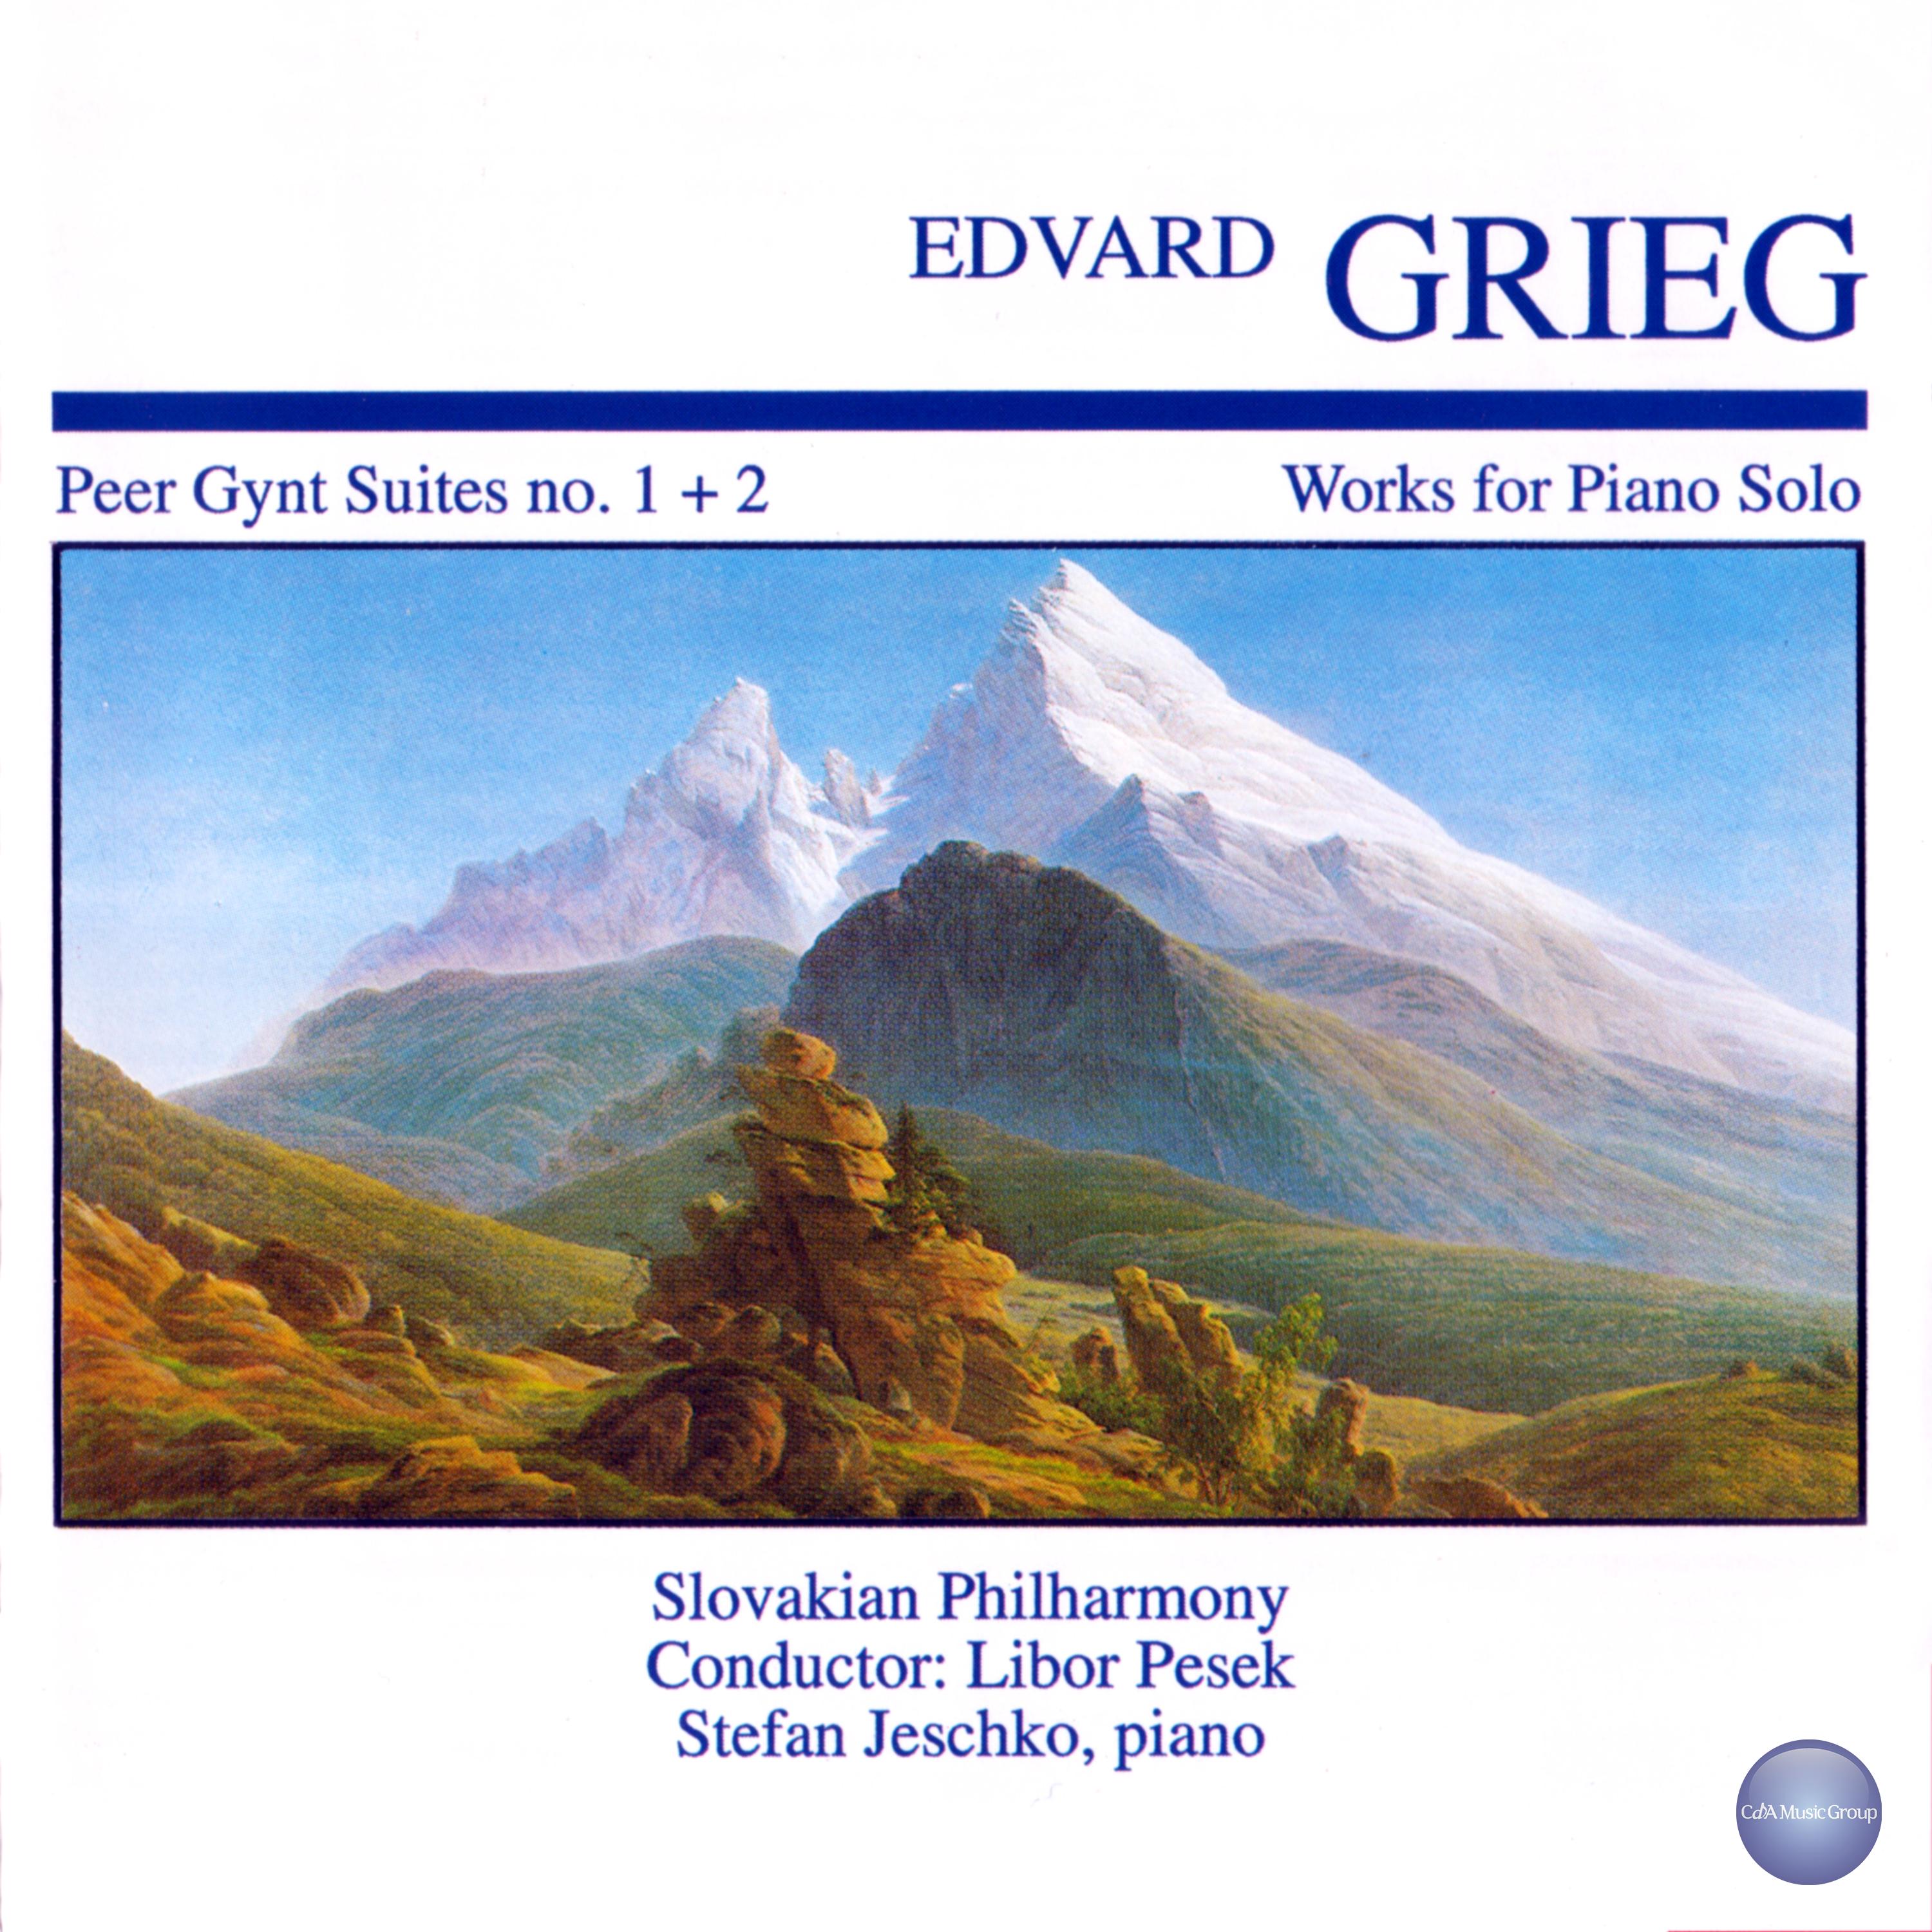 Peer Gynt-Suite No. 2, Op. 55: I. The Abduction and Ingrid's Complaint